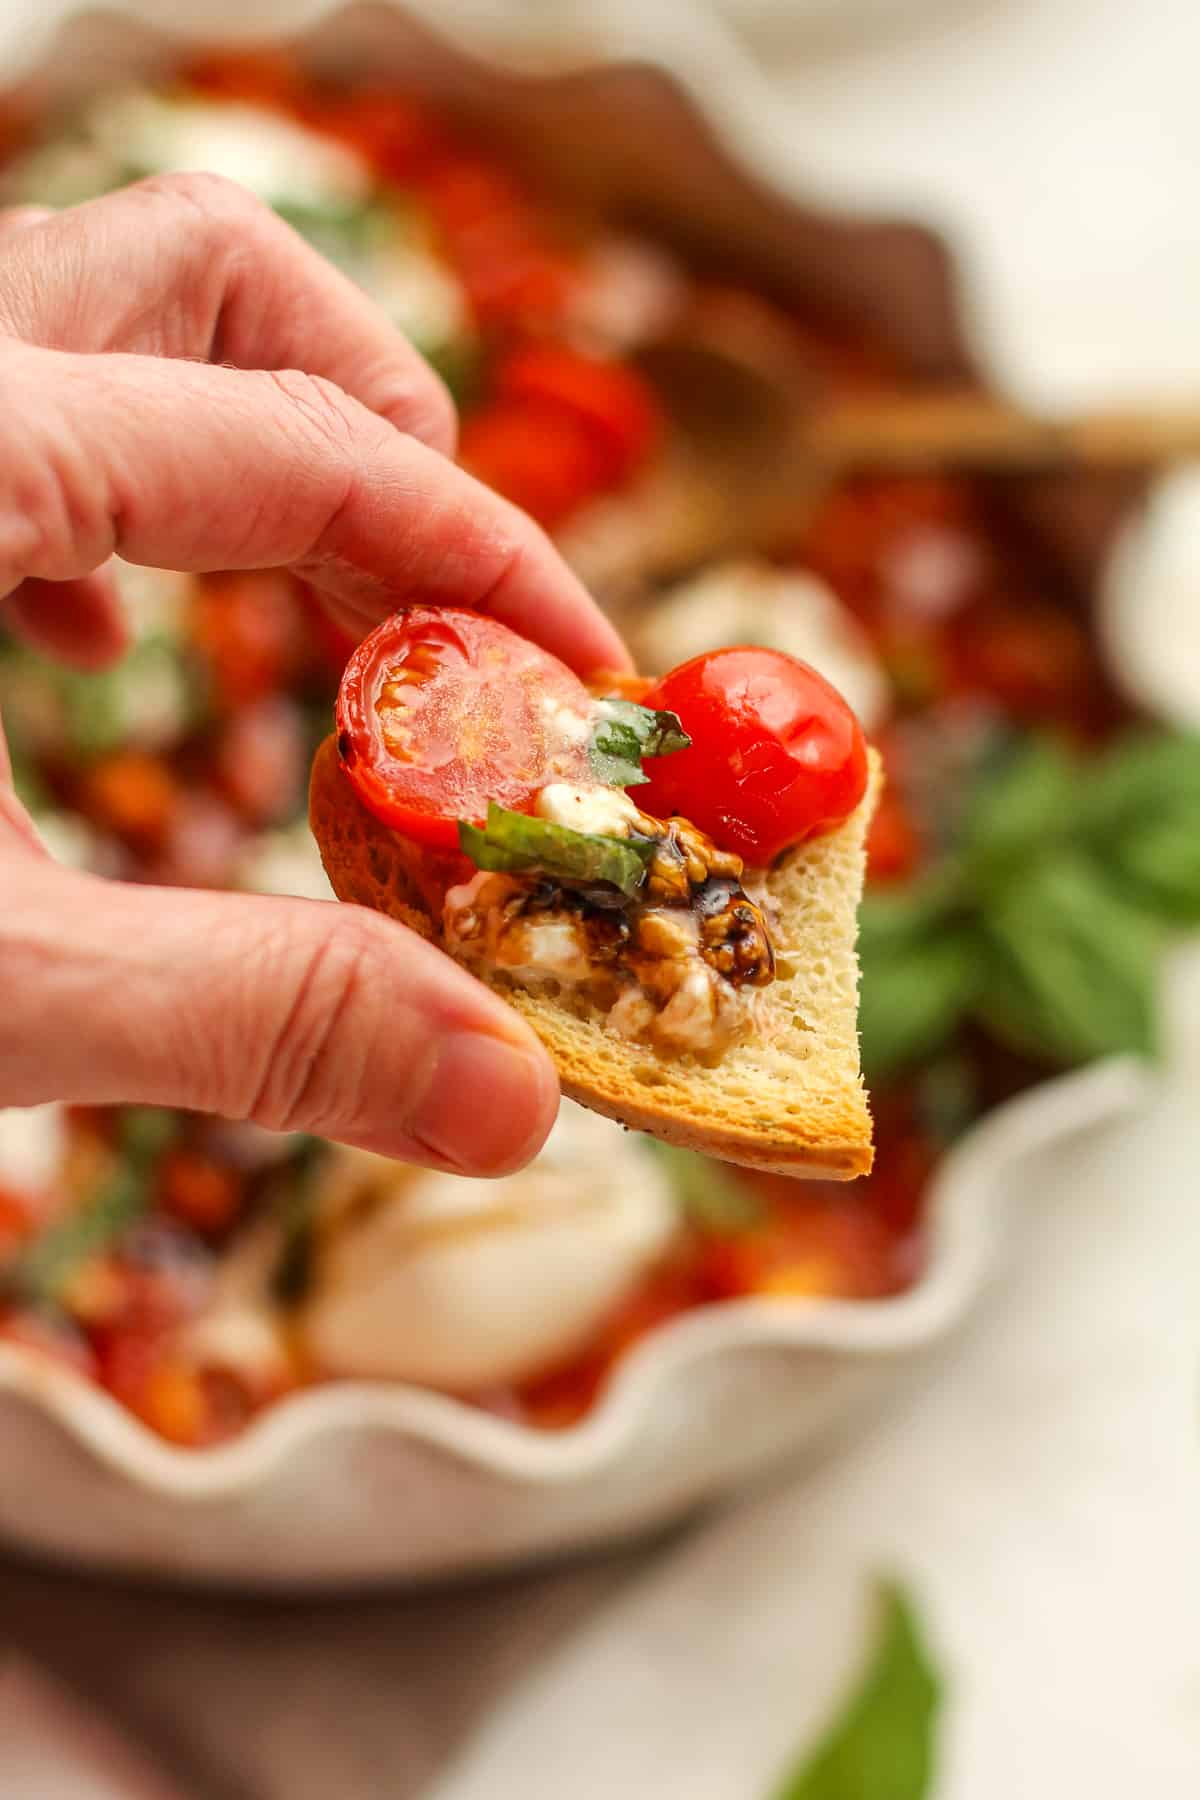 A hand holding a piece of toasted bread with roasted tomatoes and burrata.